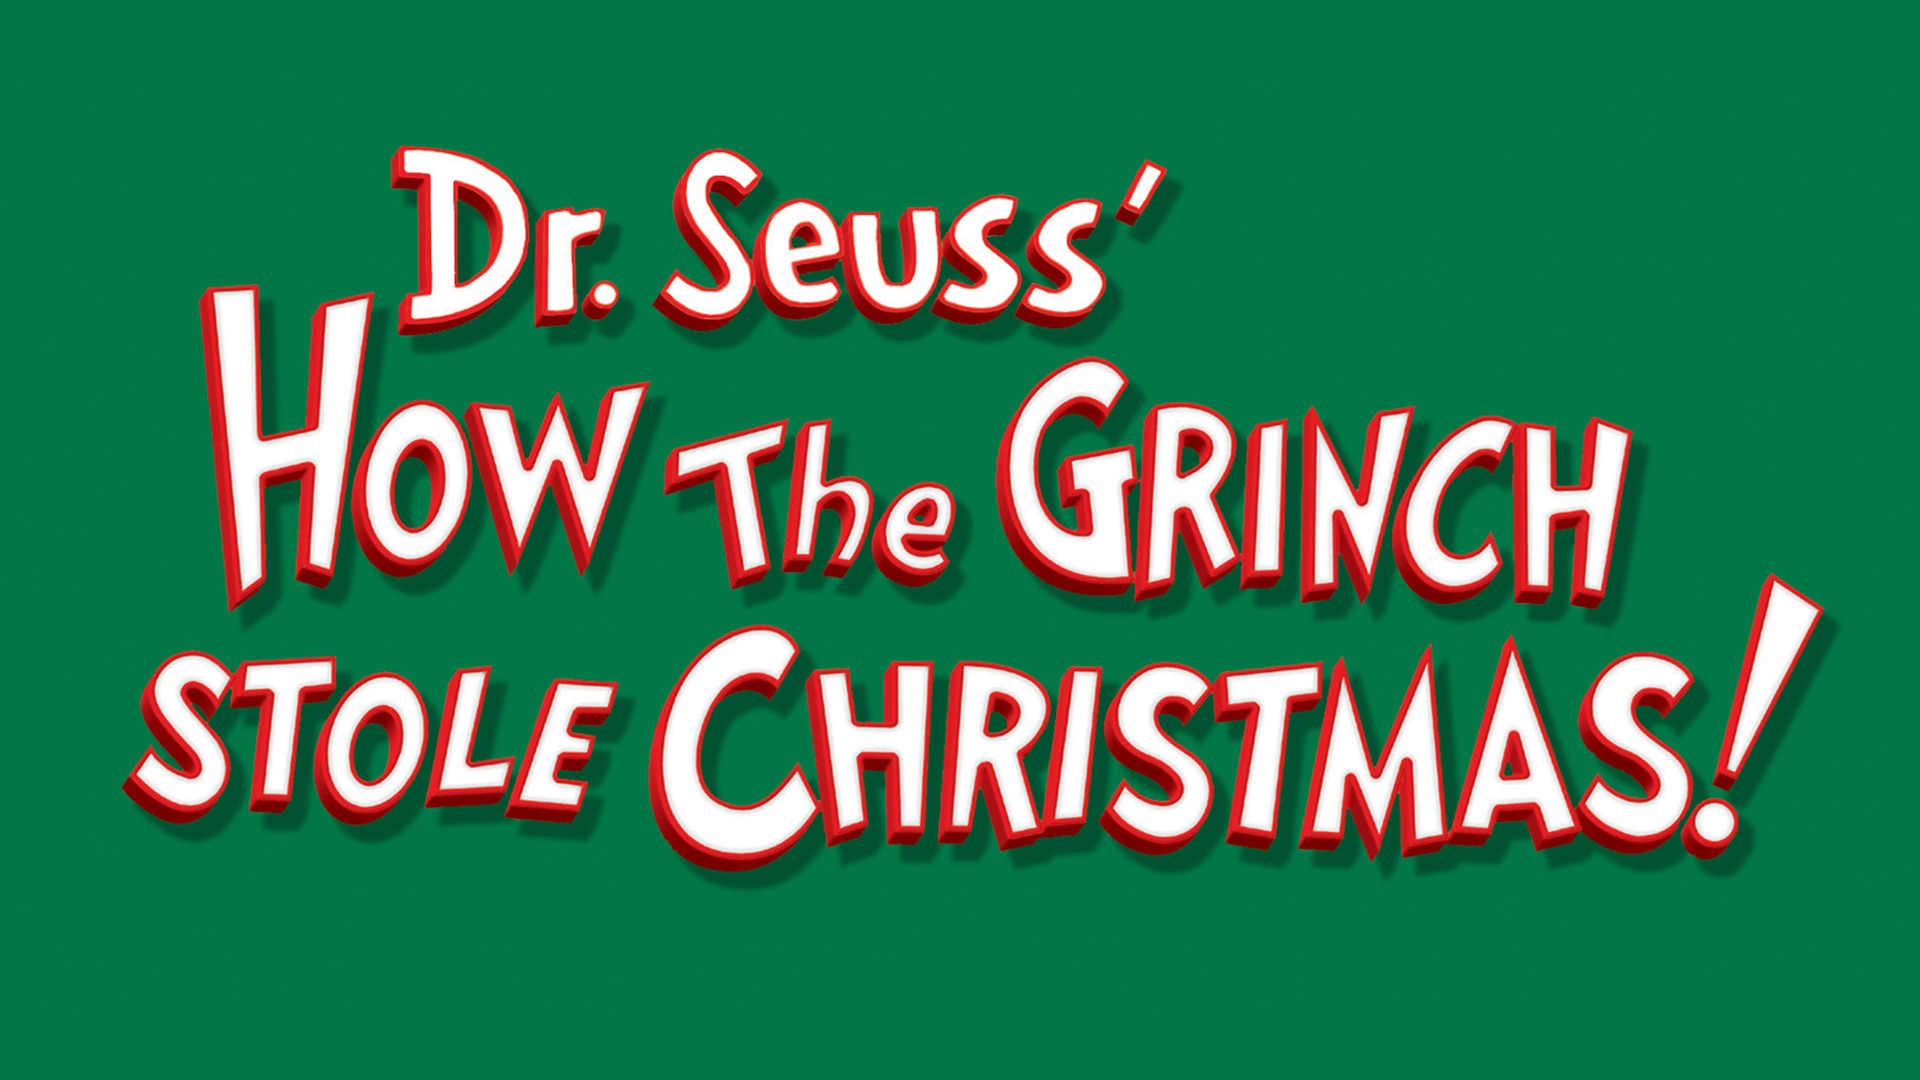 How The Grinch Stole Christmas Logo